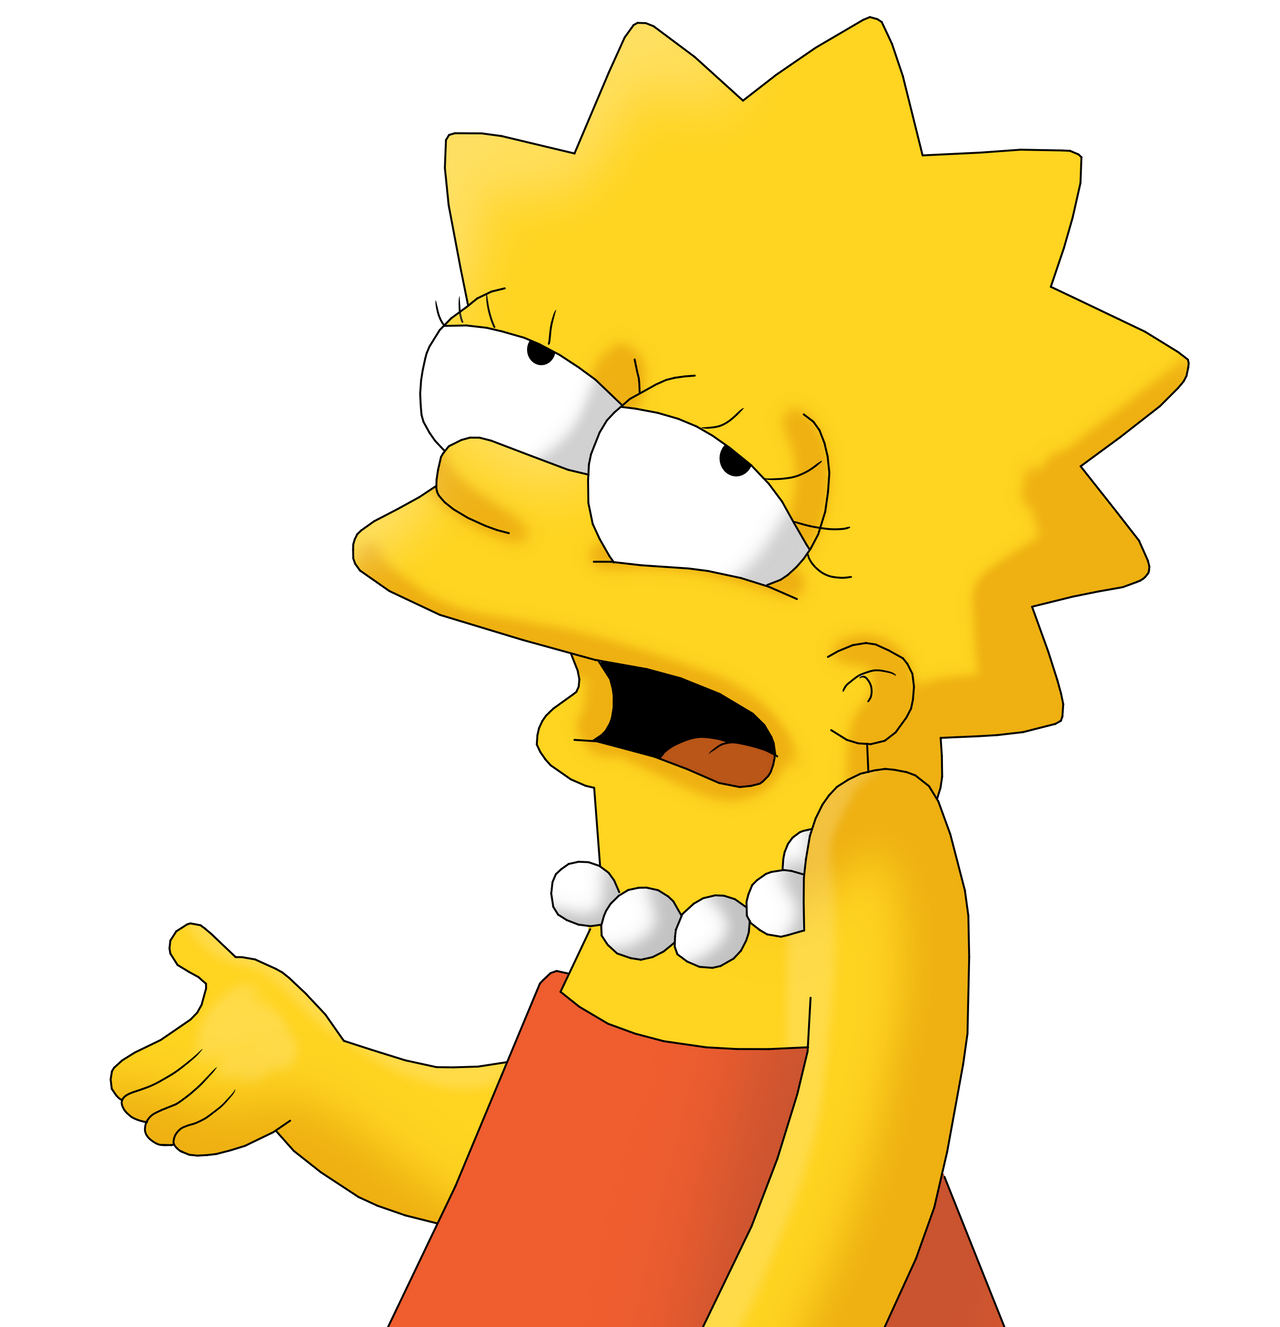 lisa_simpson_meh_by_captainedwardteague_dduzwf7-fullview.png